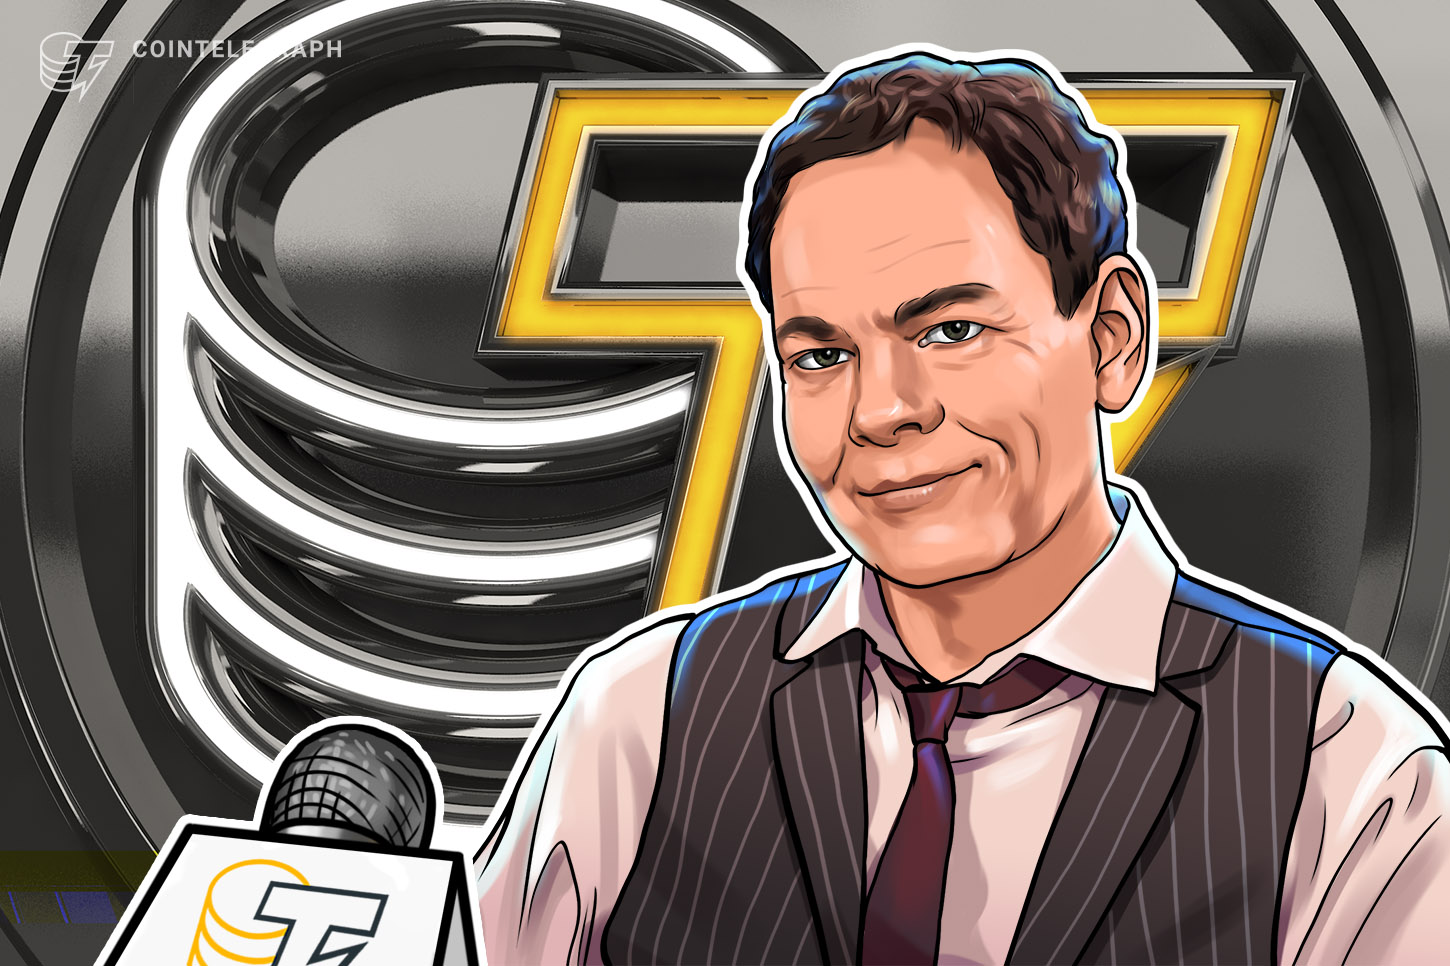 Paul Tudor Jones to Be Largest Bitcoin Holder in 2 Years — Max Keiser